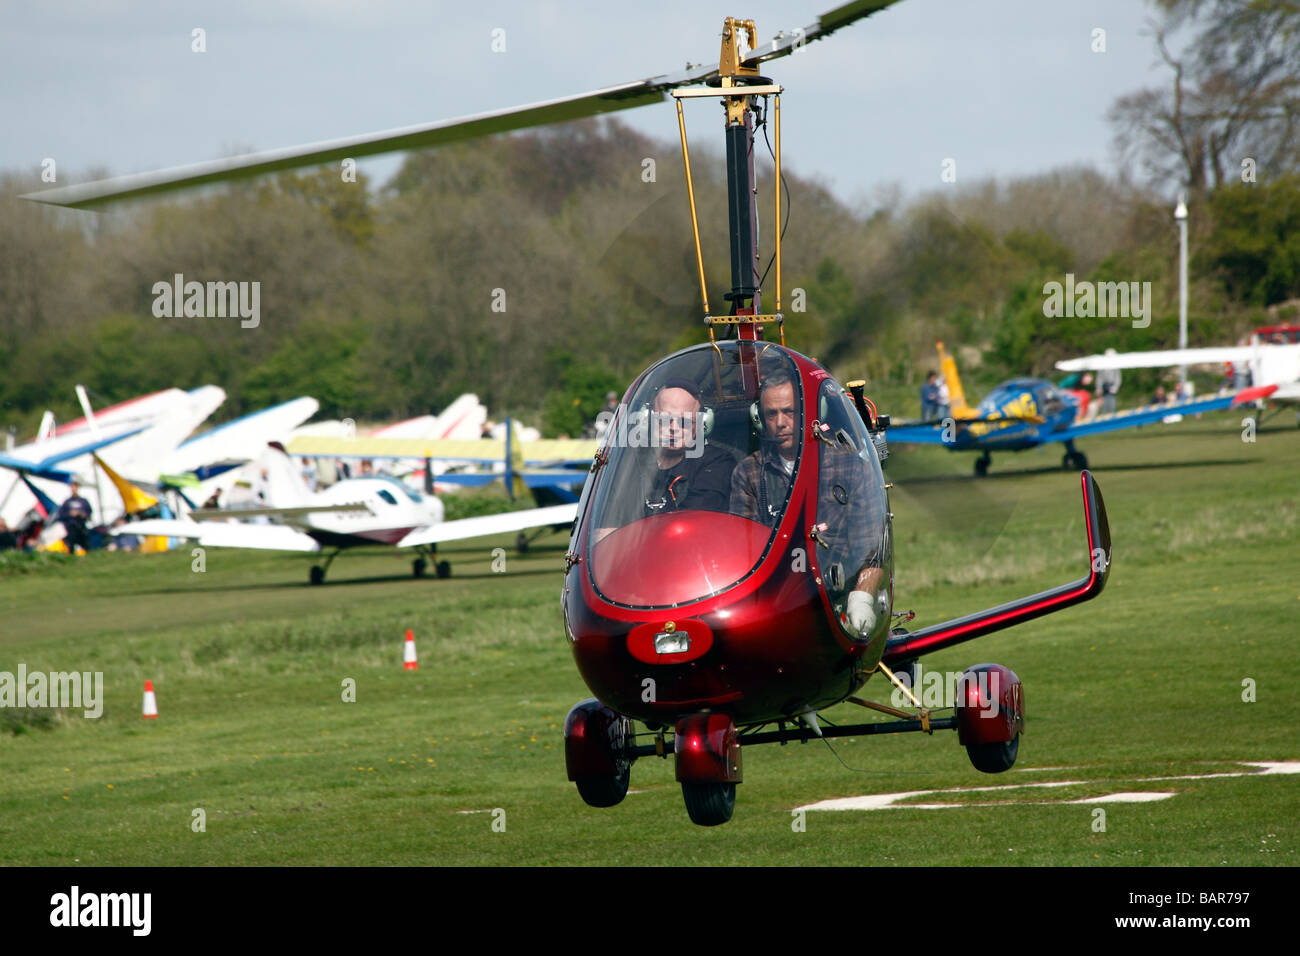 An autogyro flying at Popham airfield in Hampshire in England Stock Photo